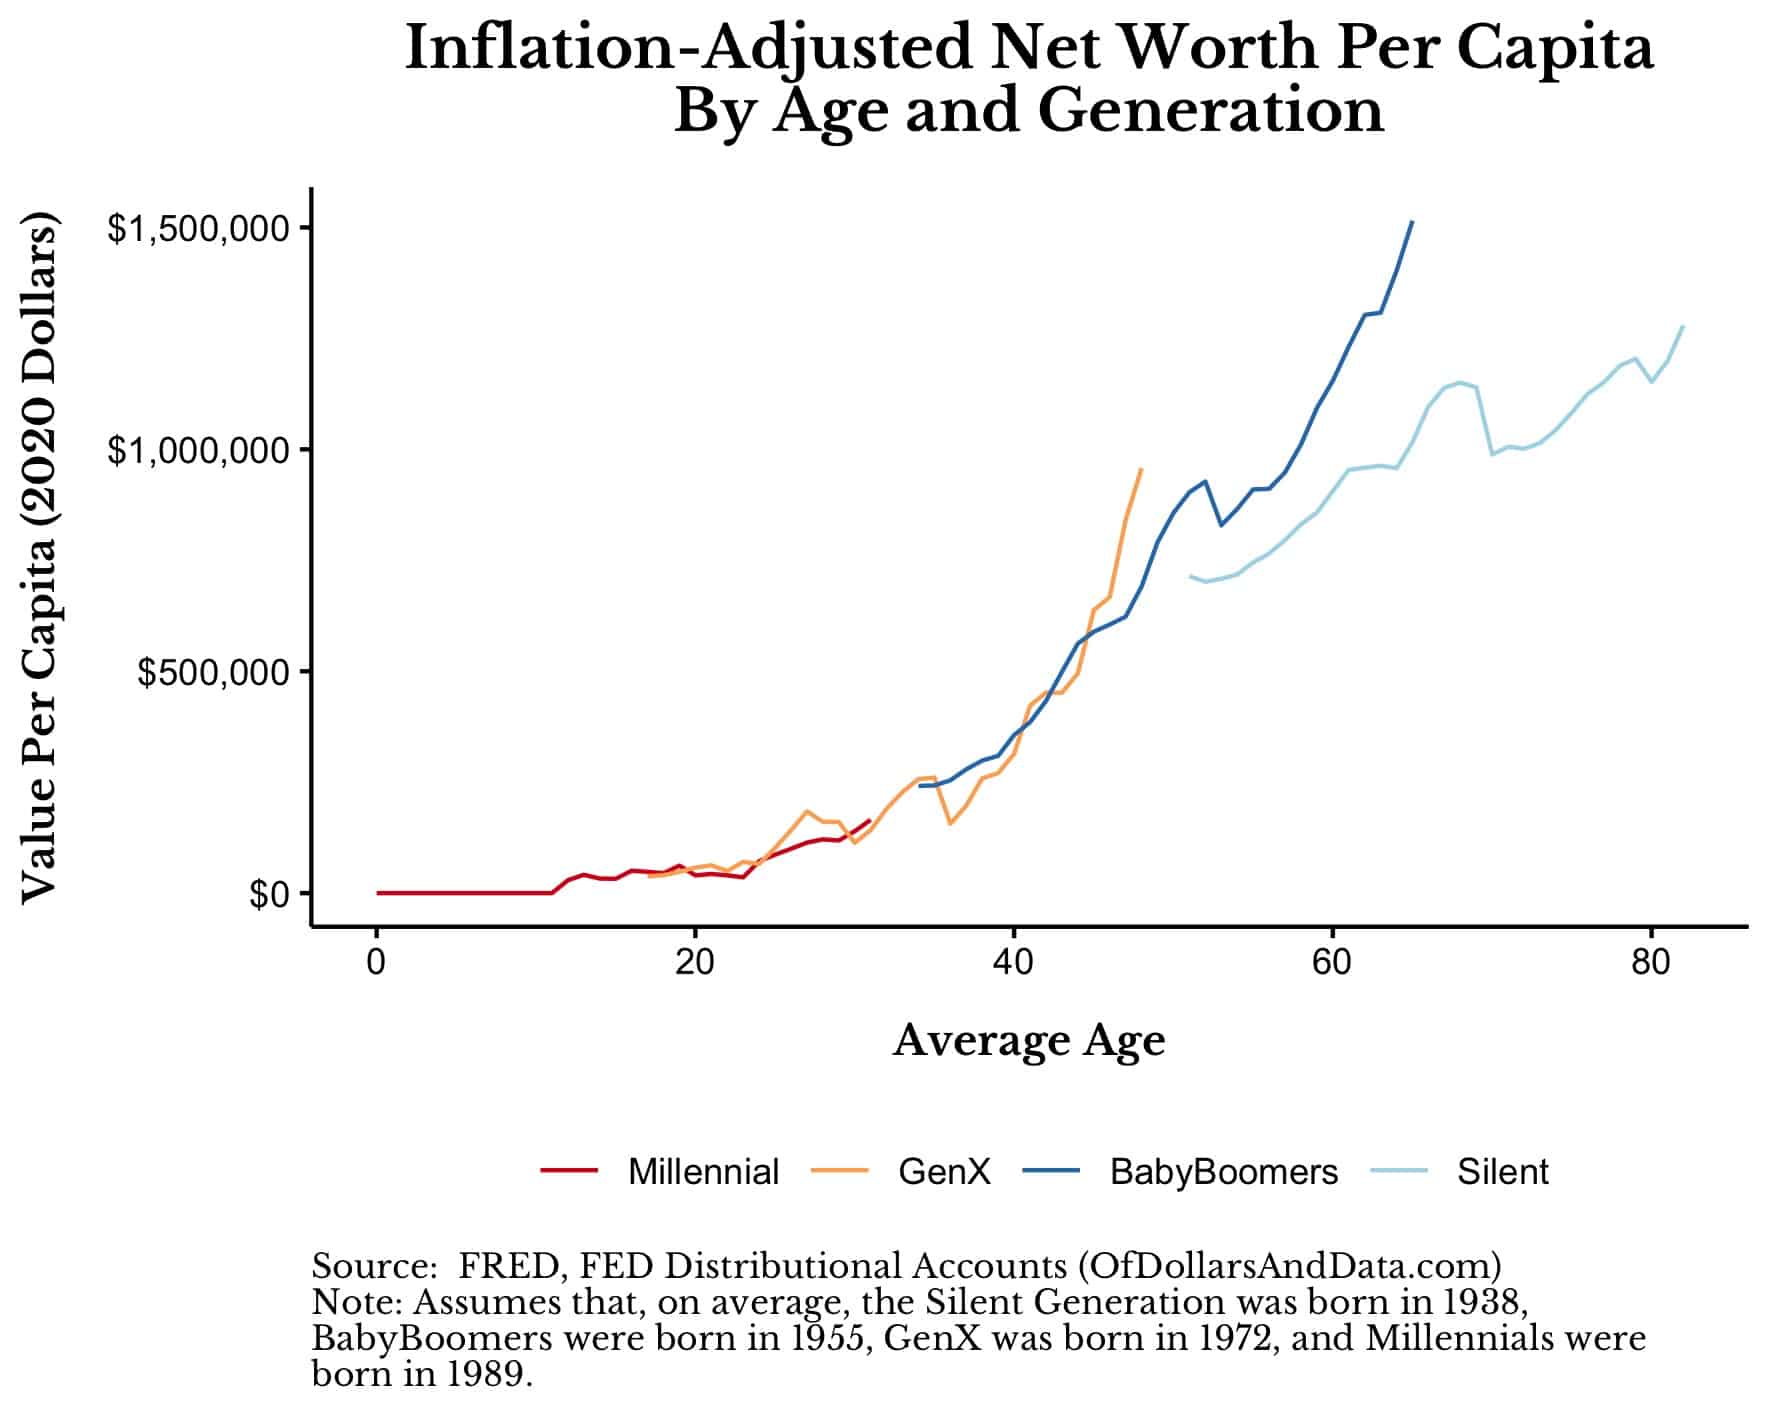 Inflation-adjusted net worth per capita by age and generation